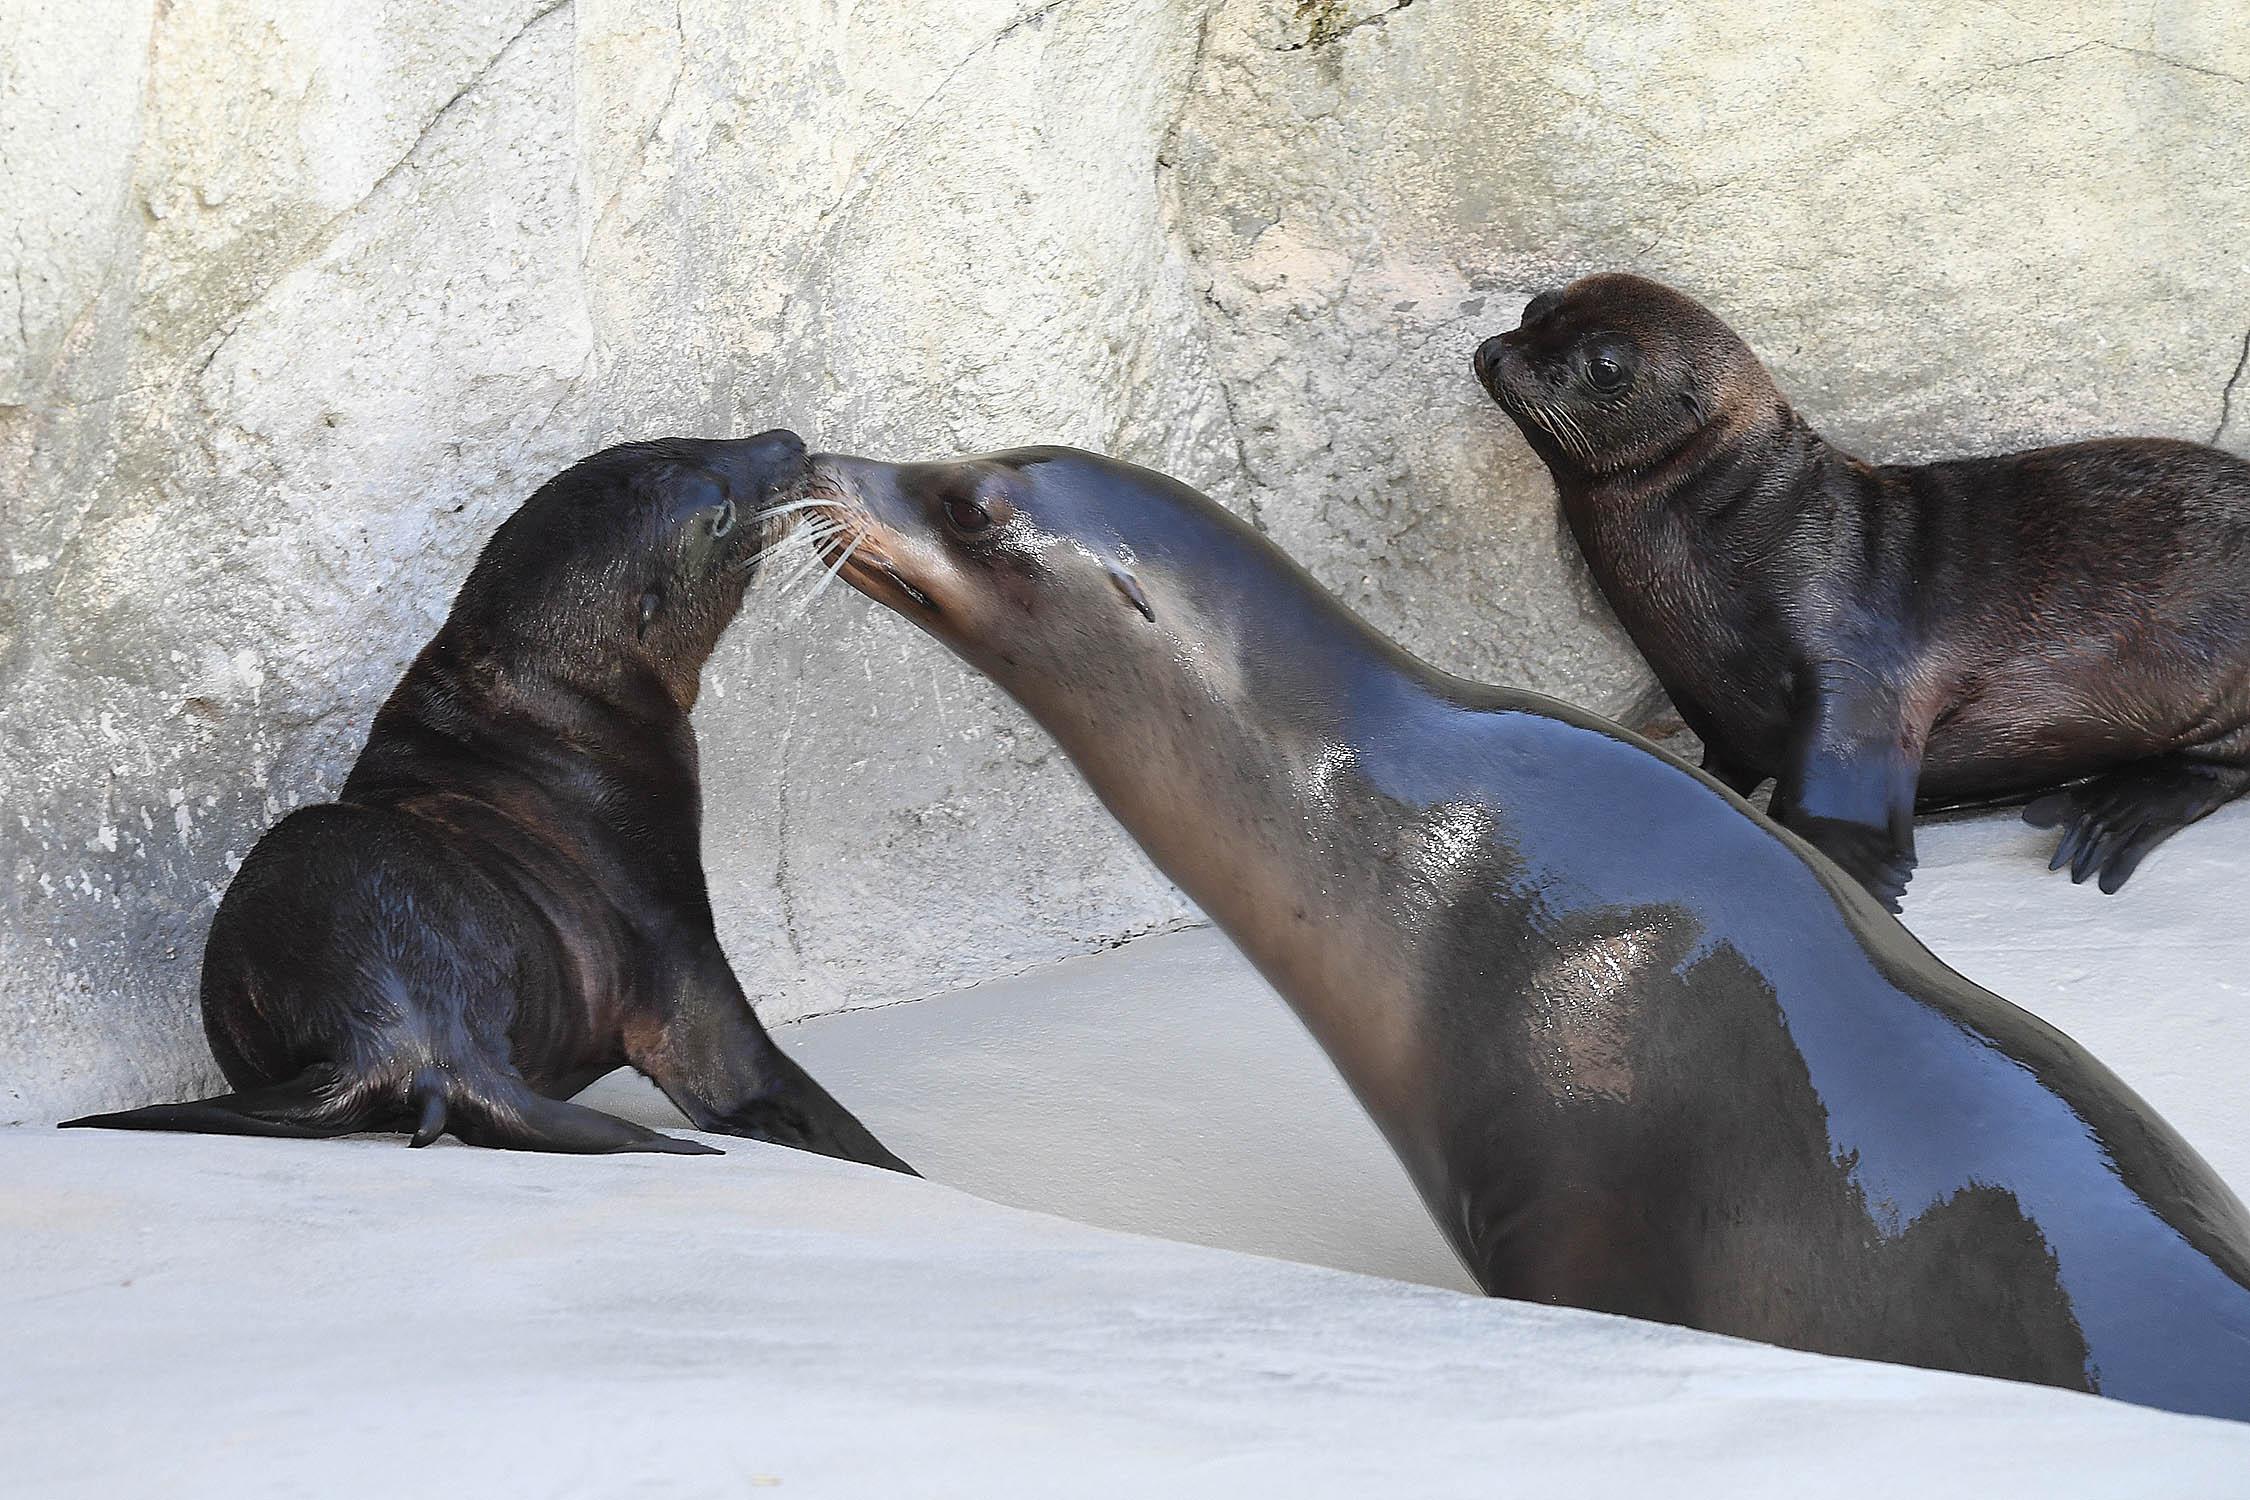 Two California sea lion pups born at Brookfield Zoo on June 4 and 11 can now be seen in their outdoor habitat at Pinniped Point. Also pictured is one of the moms, Arie. (Jim Schulz / Chicago Zoological Society)